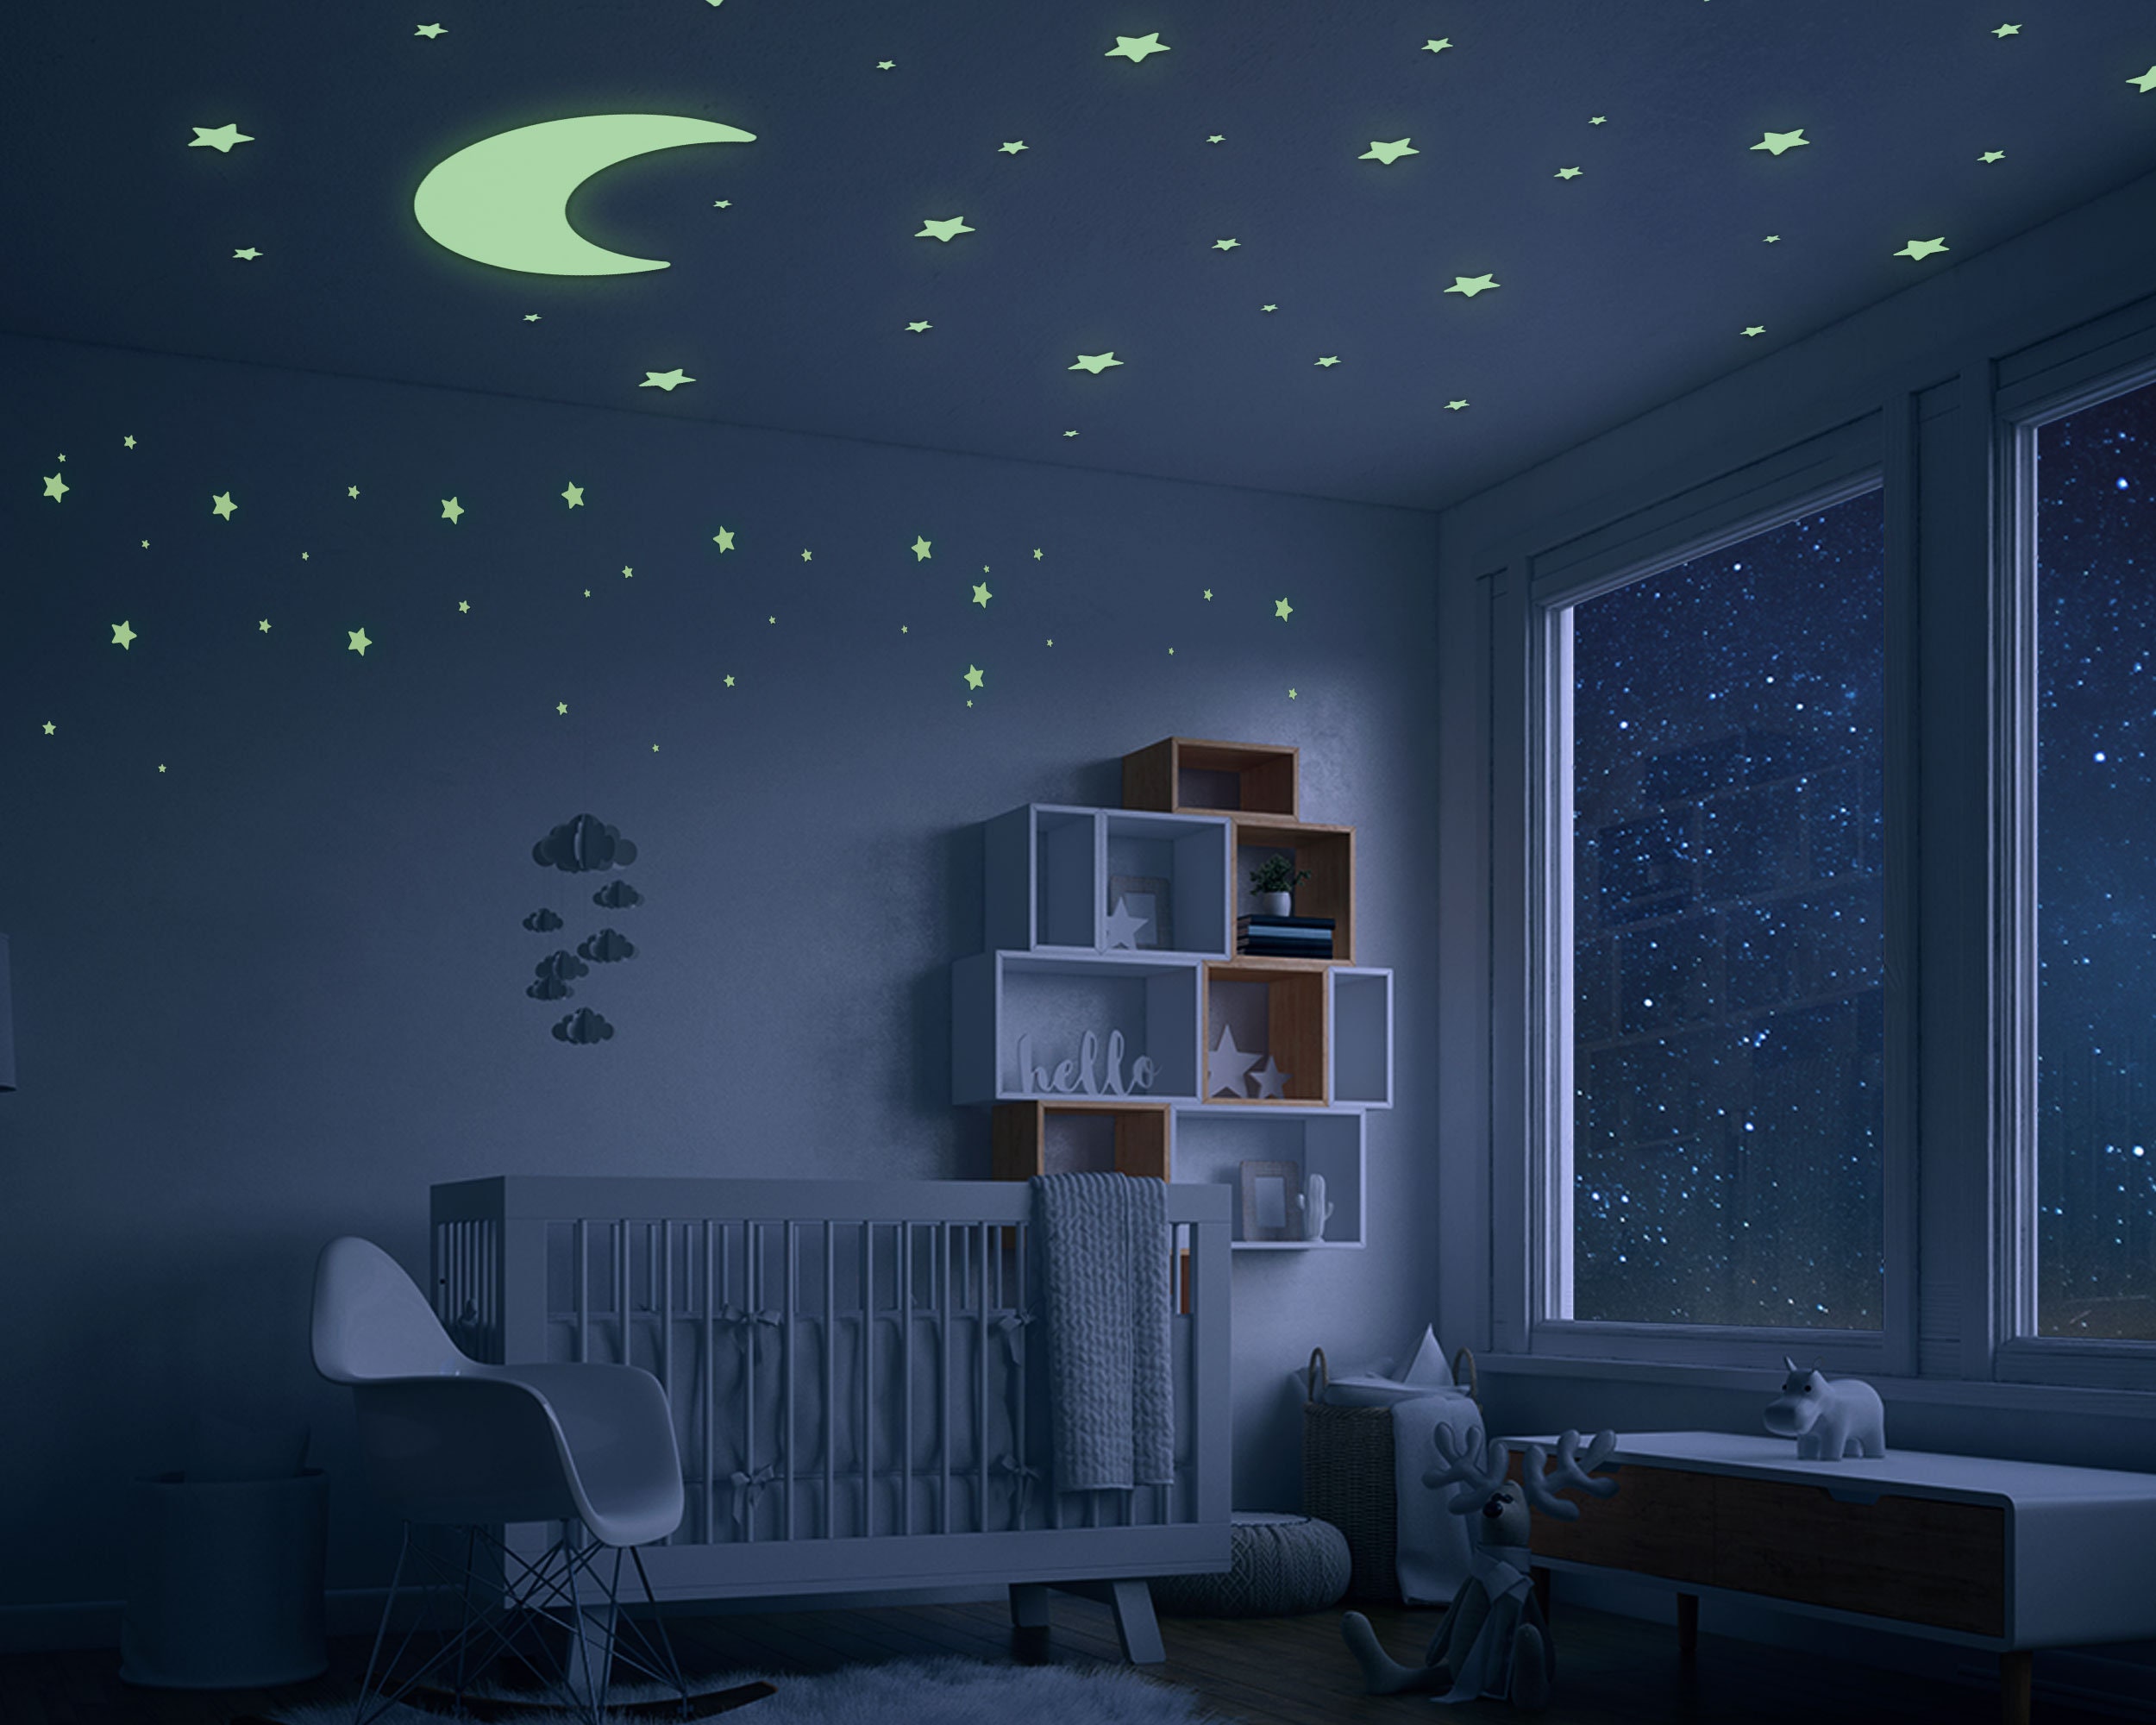 100pcs Glow In The Dark Stars, Fluorescent Wall & Ceiling Star Stickers,  Make Bedrooms Twinkle Like The Night Sky, Bedroom Decorations, Home Decor